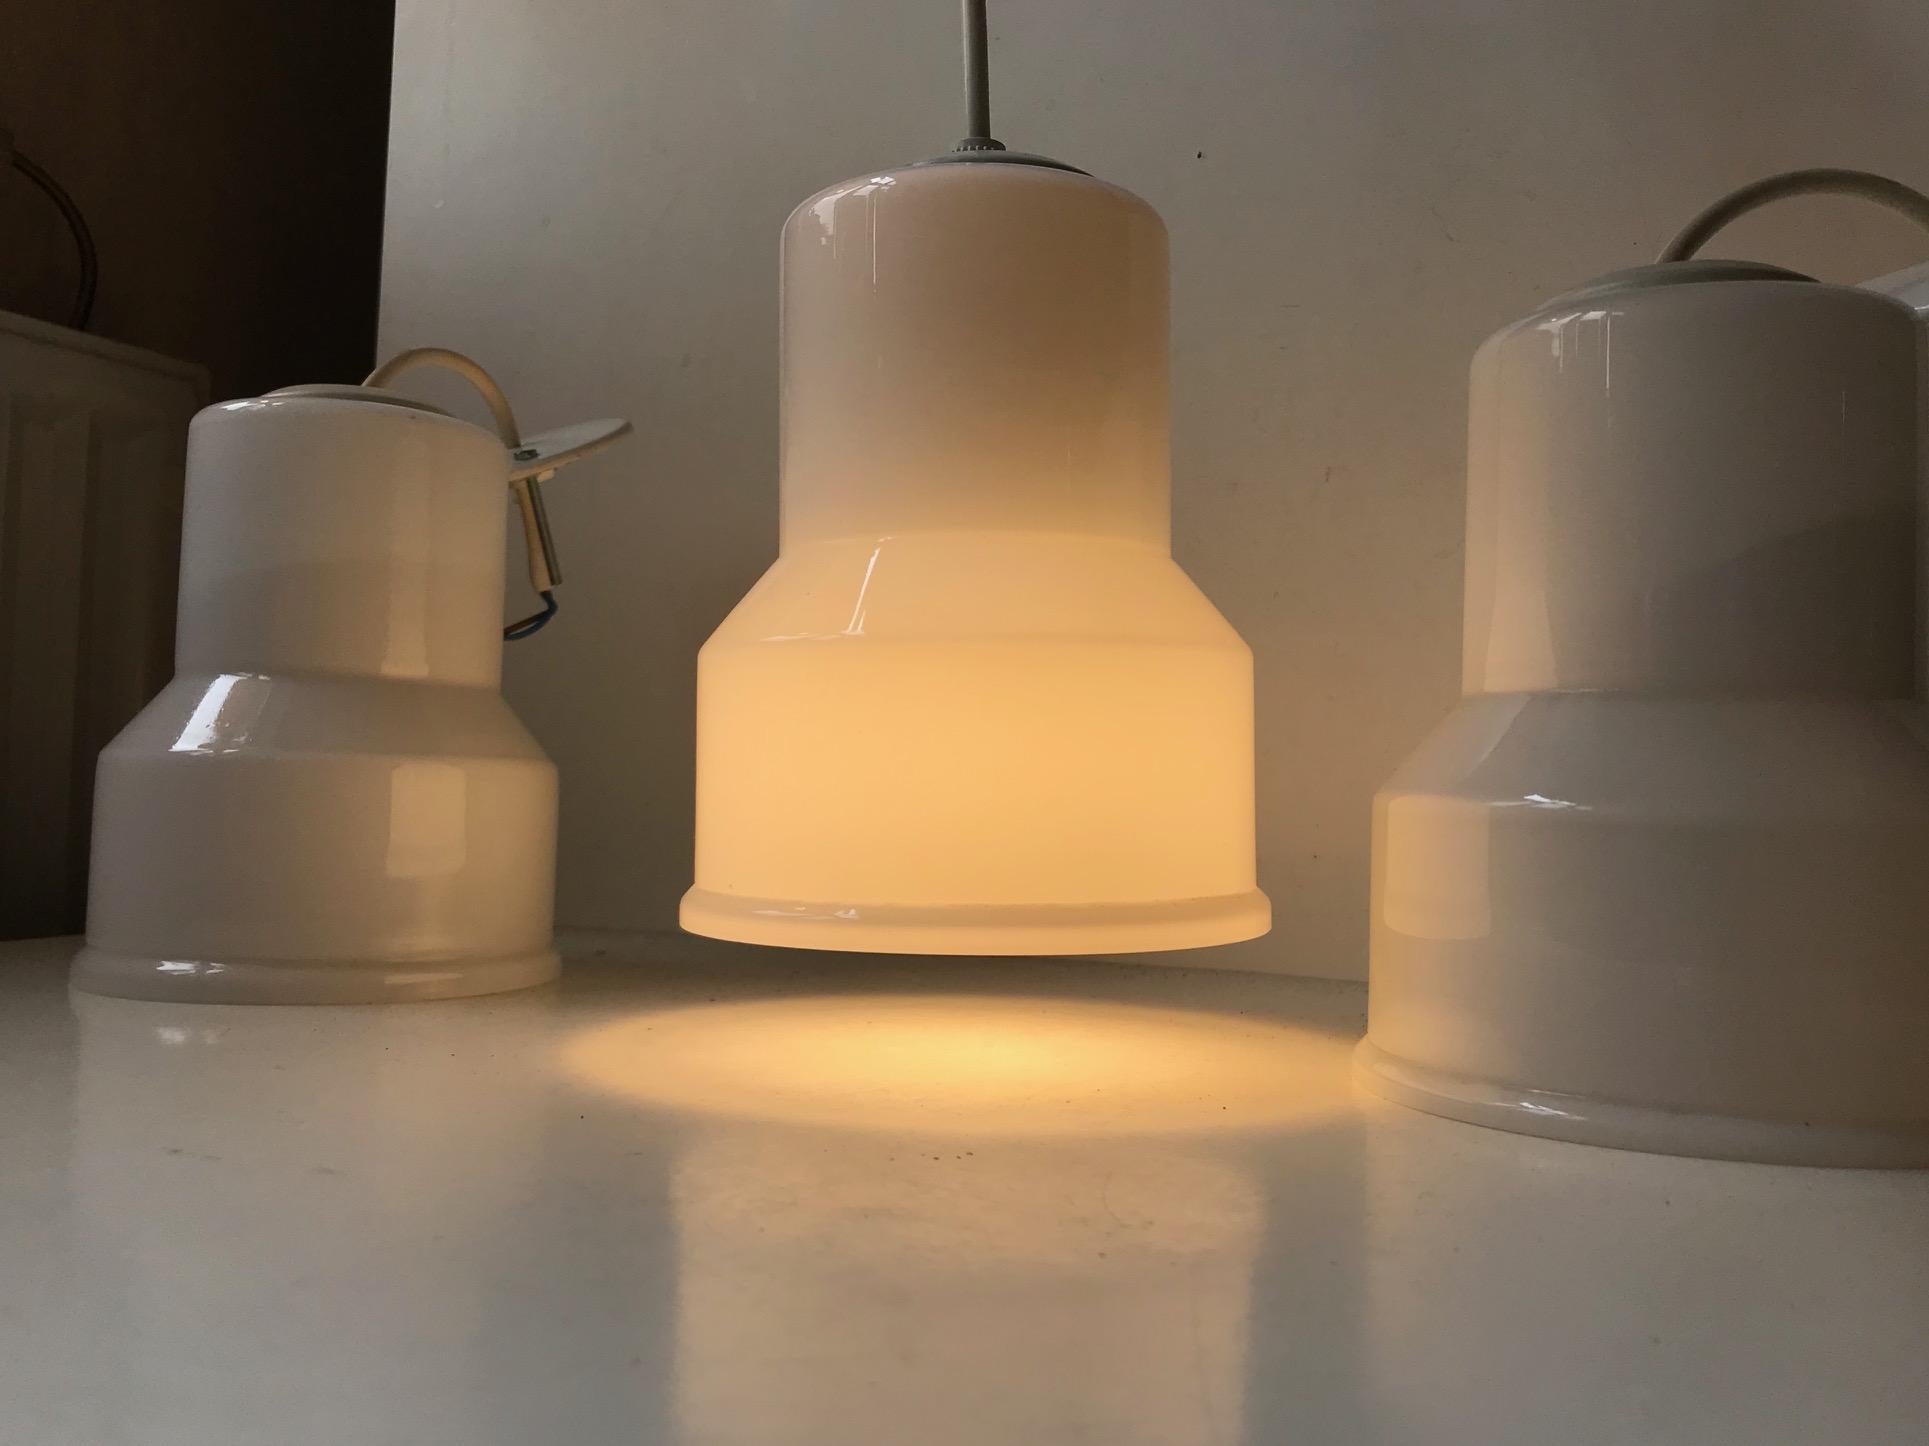 - A set of 3 white opaline glass pendant lamps
- Manufactured and designed by Lyskær (previously NES) in Denmark
- Dates from the early 1970s
- Comes with 3 x 3 meters of new white cord.